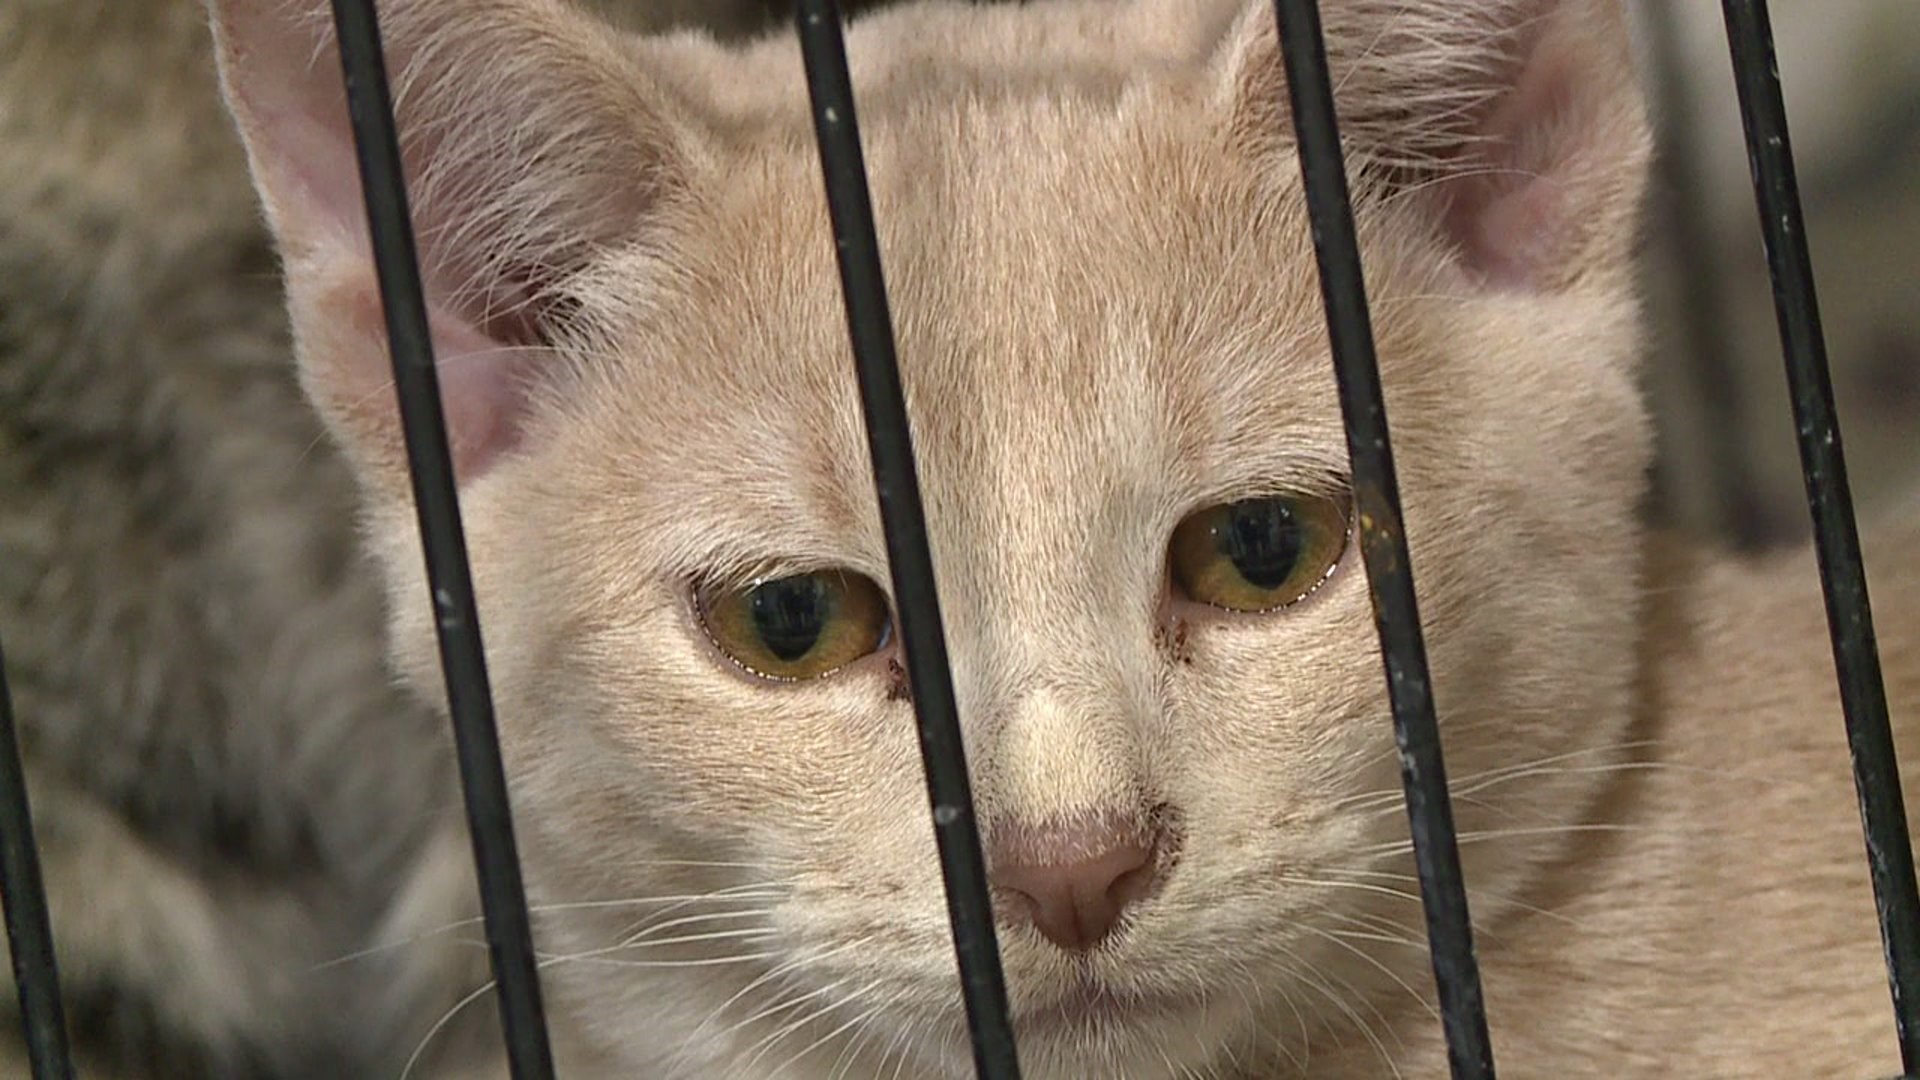 Rescued cats will soon be ready for adoption in Kewanee